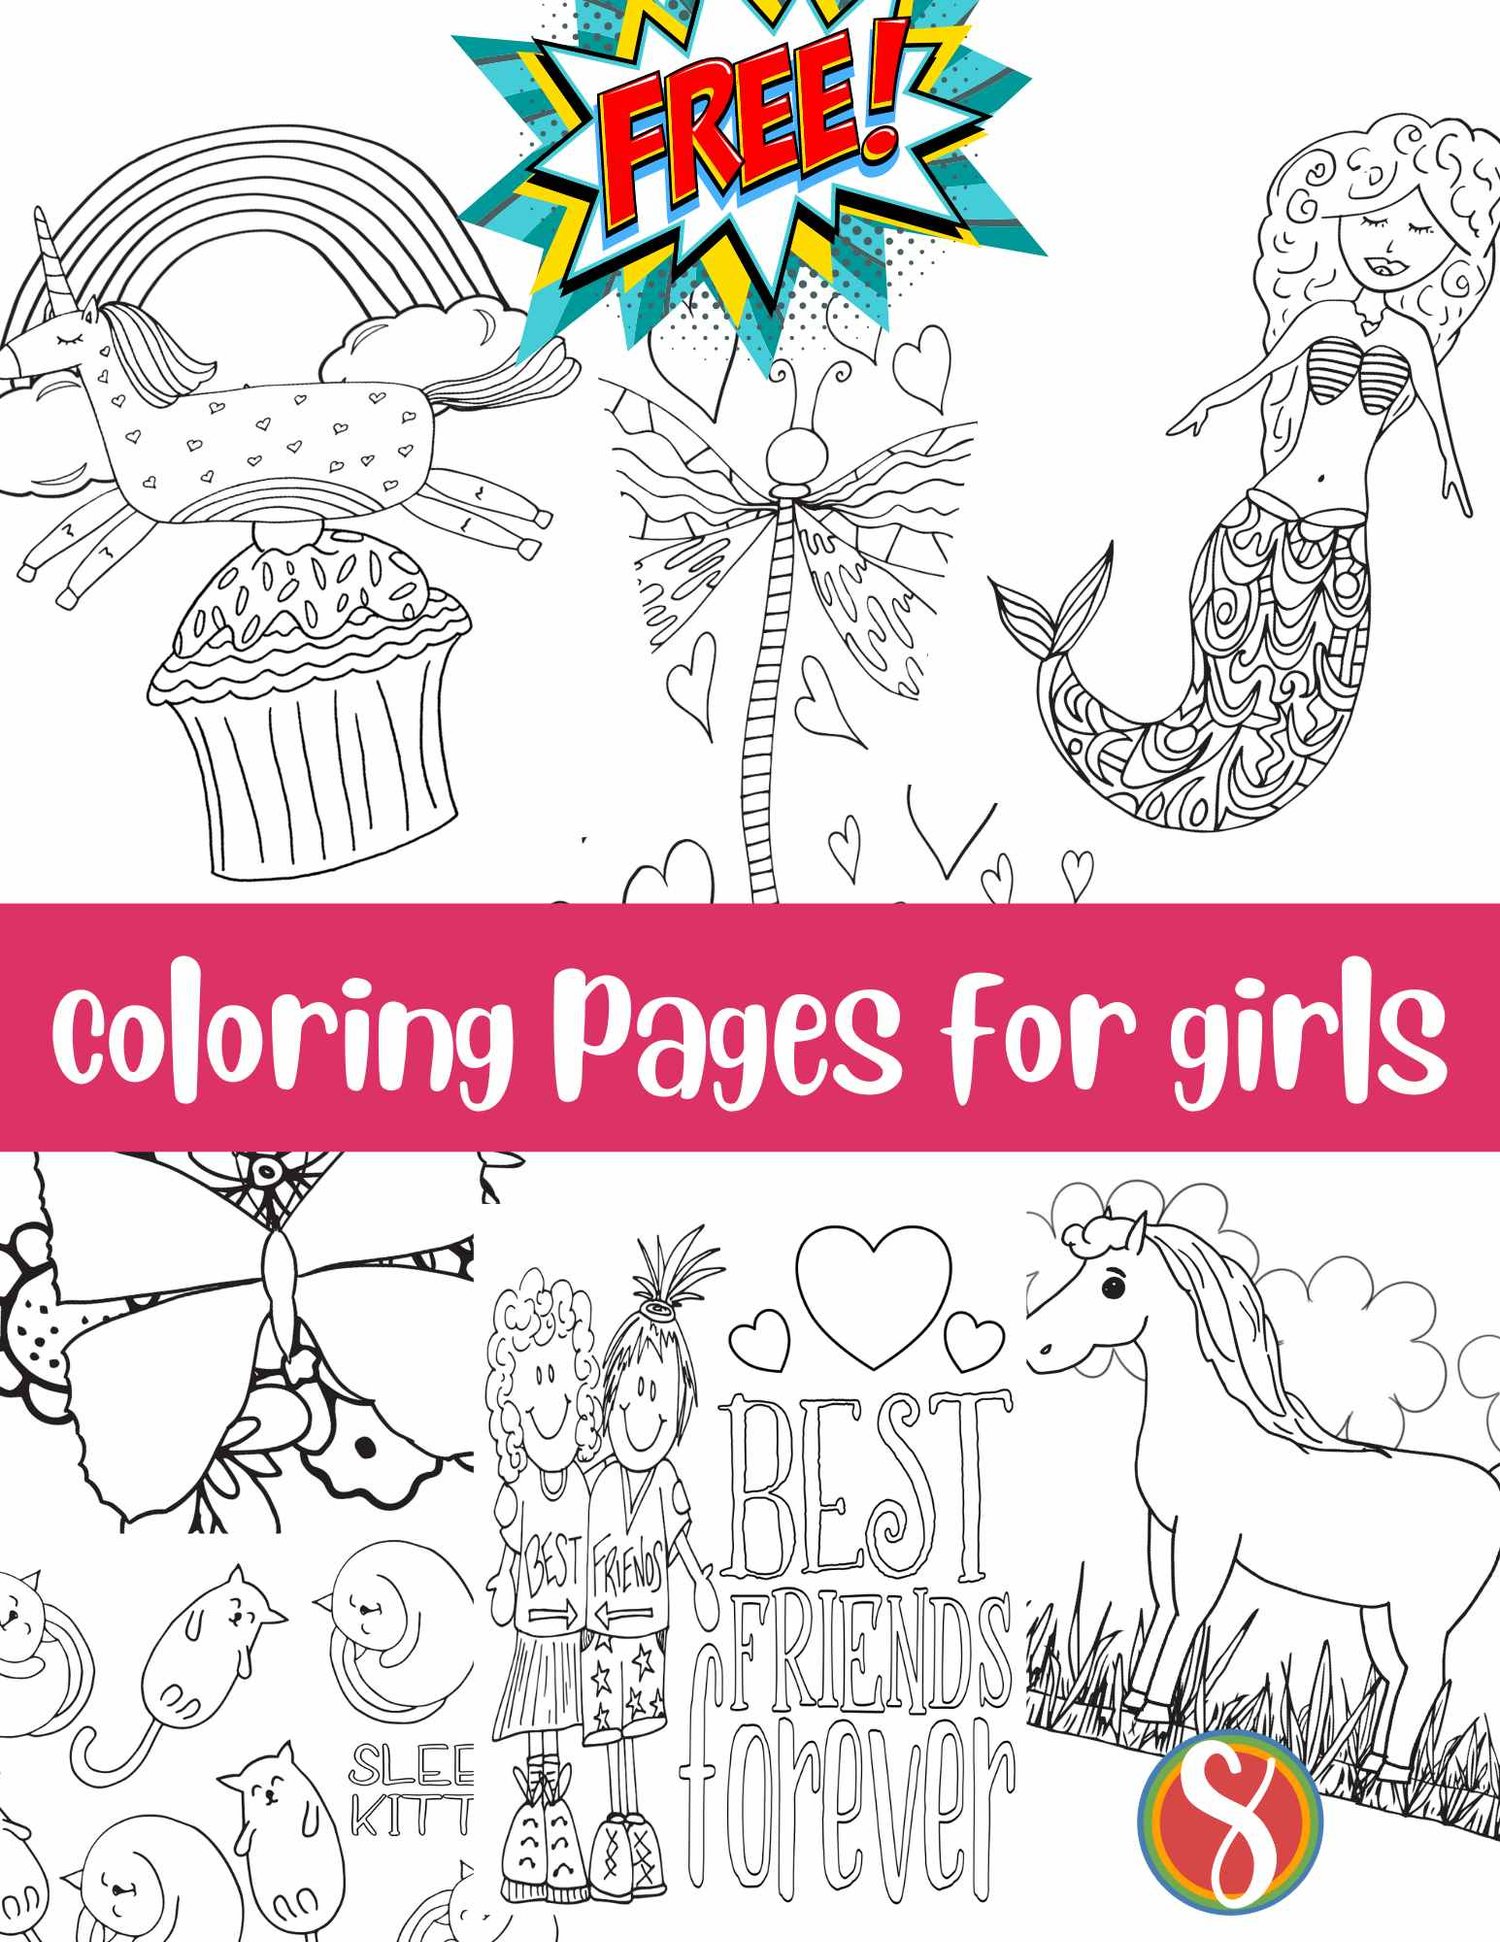 Free coloring pages for girls â stevie doodles